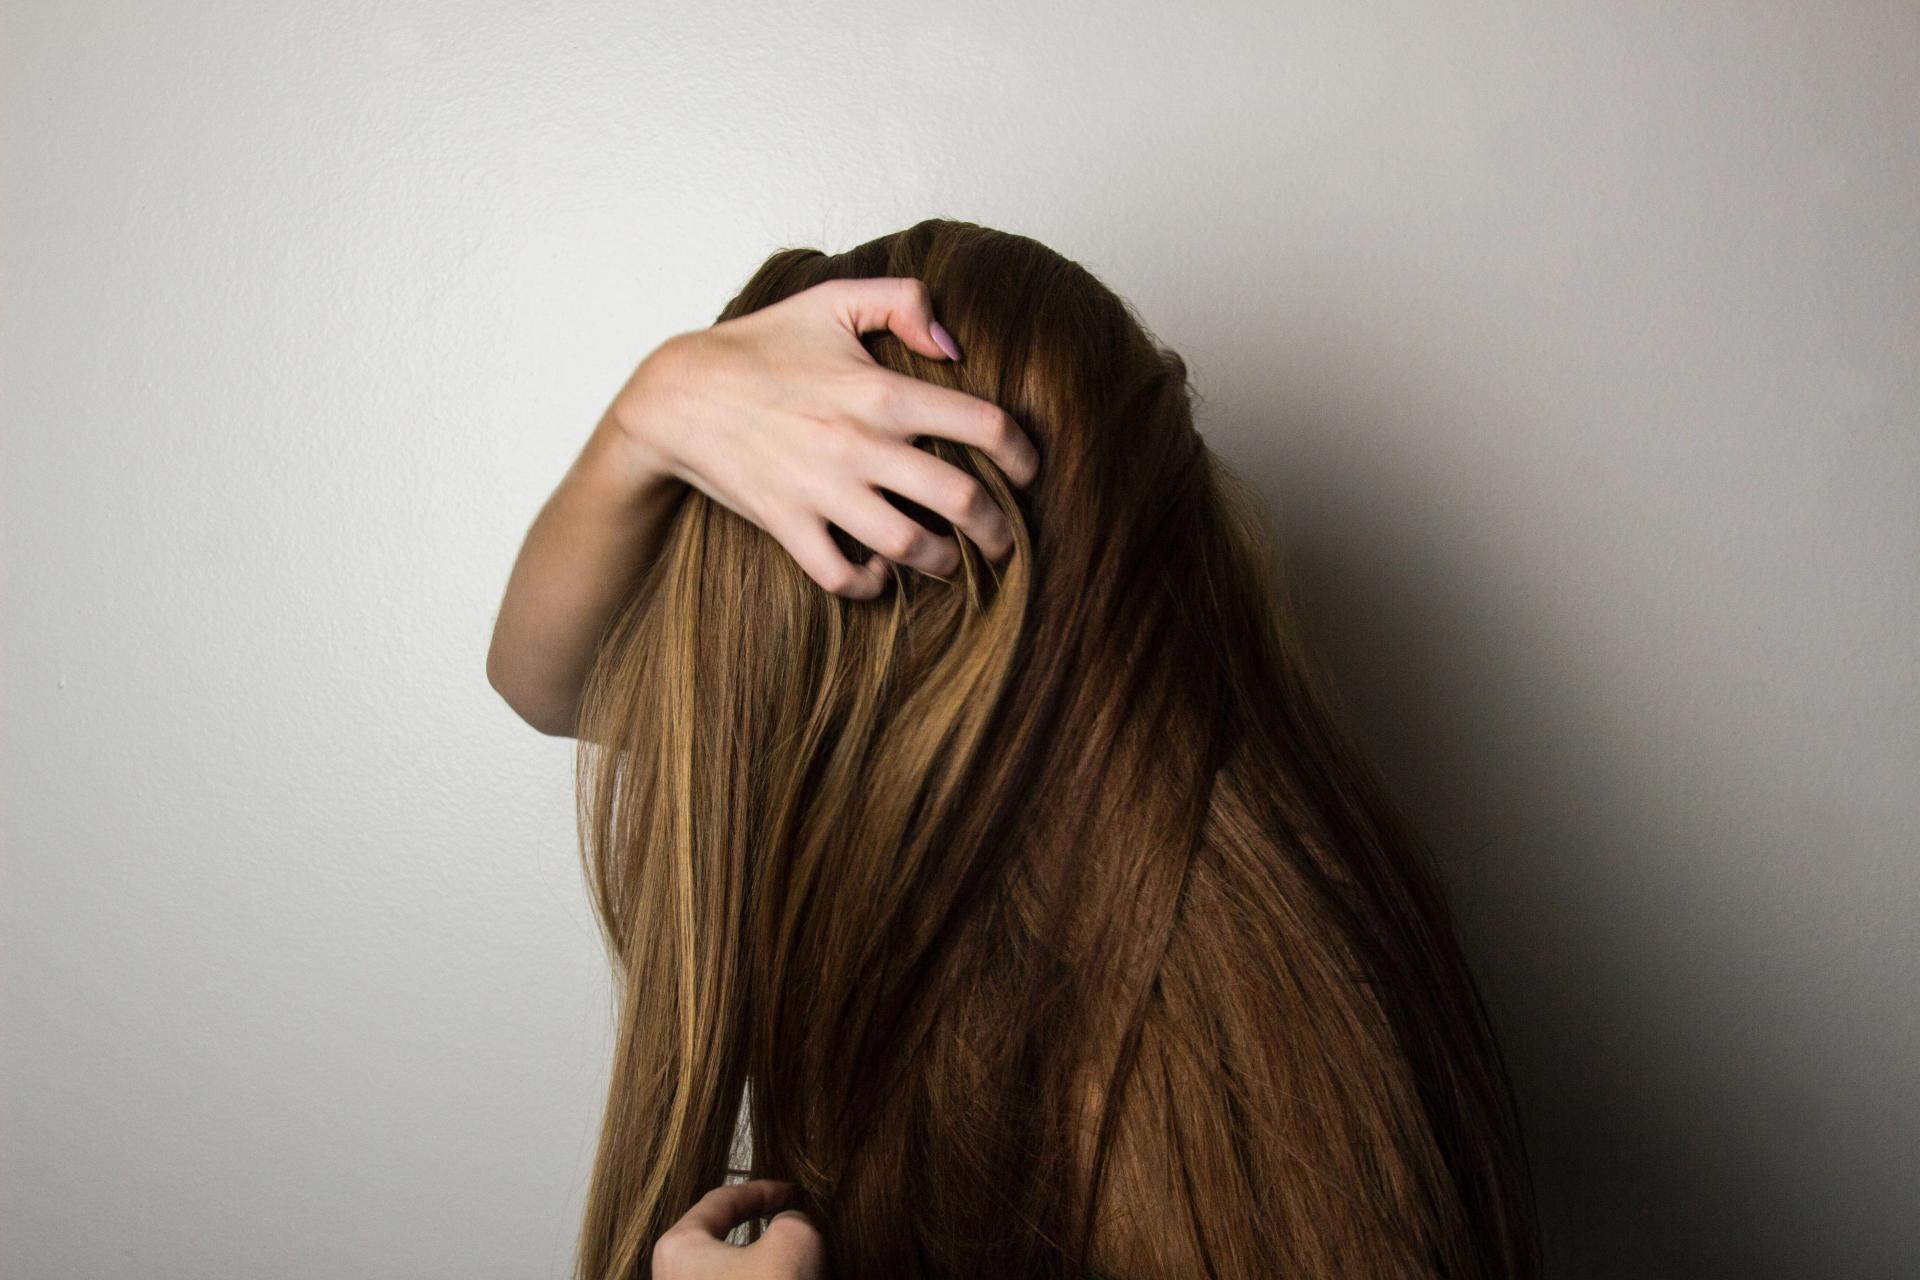 A Girl Touching her Hair